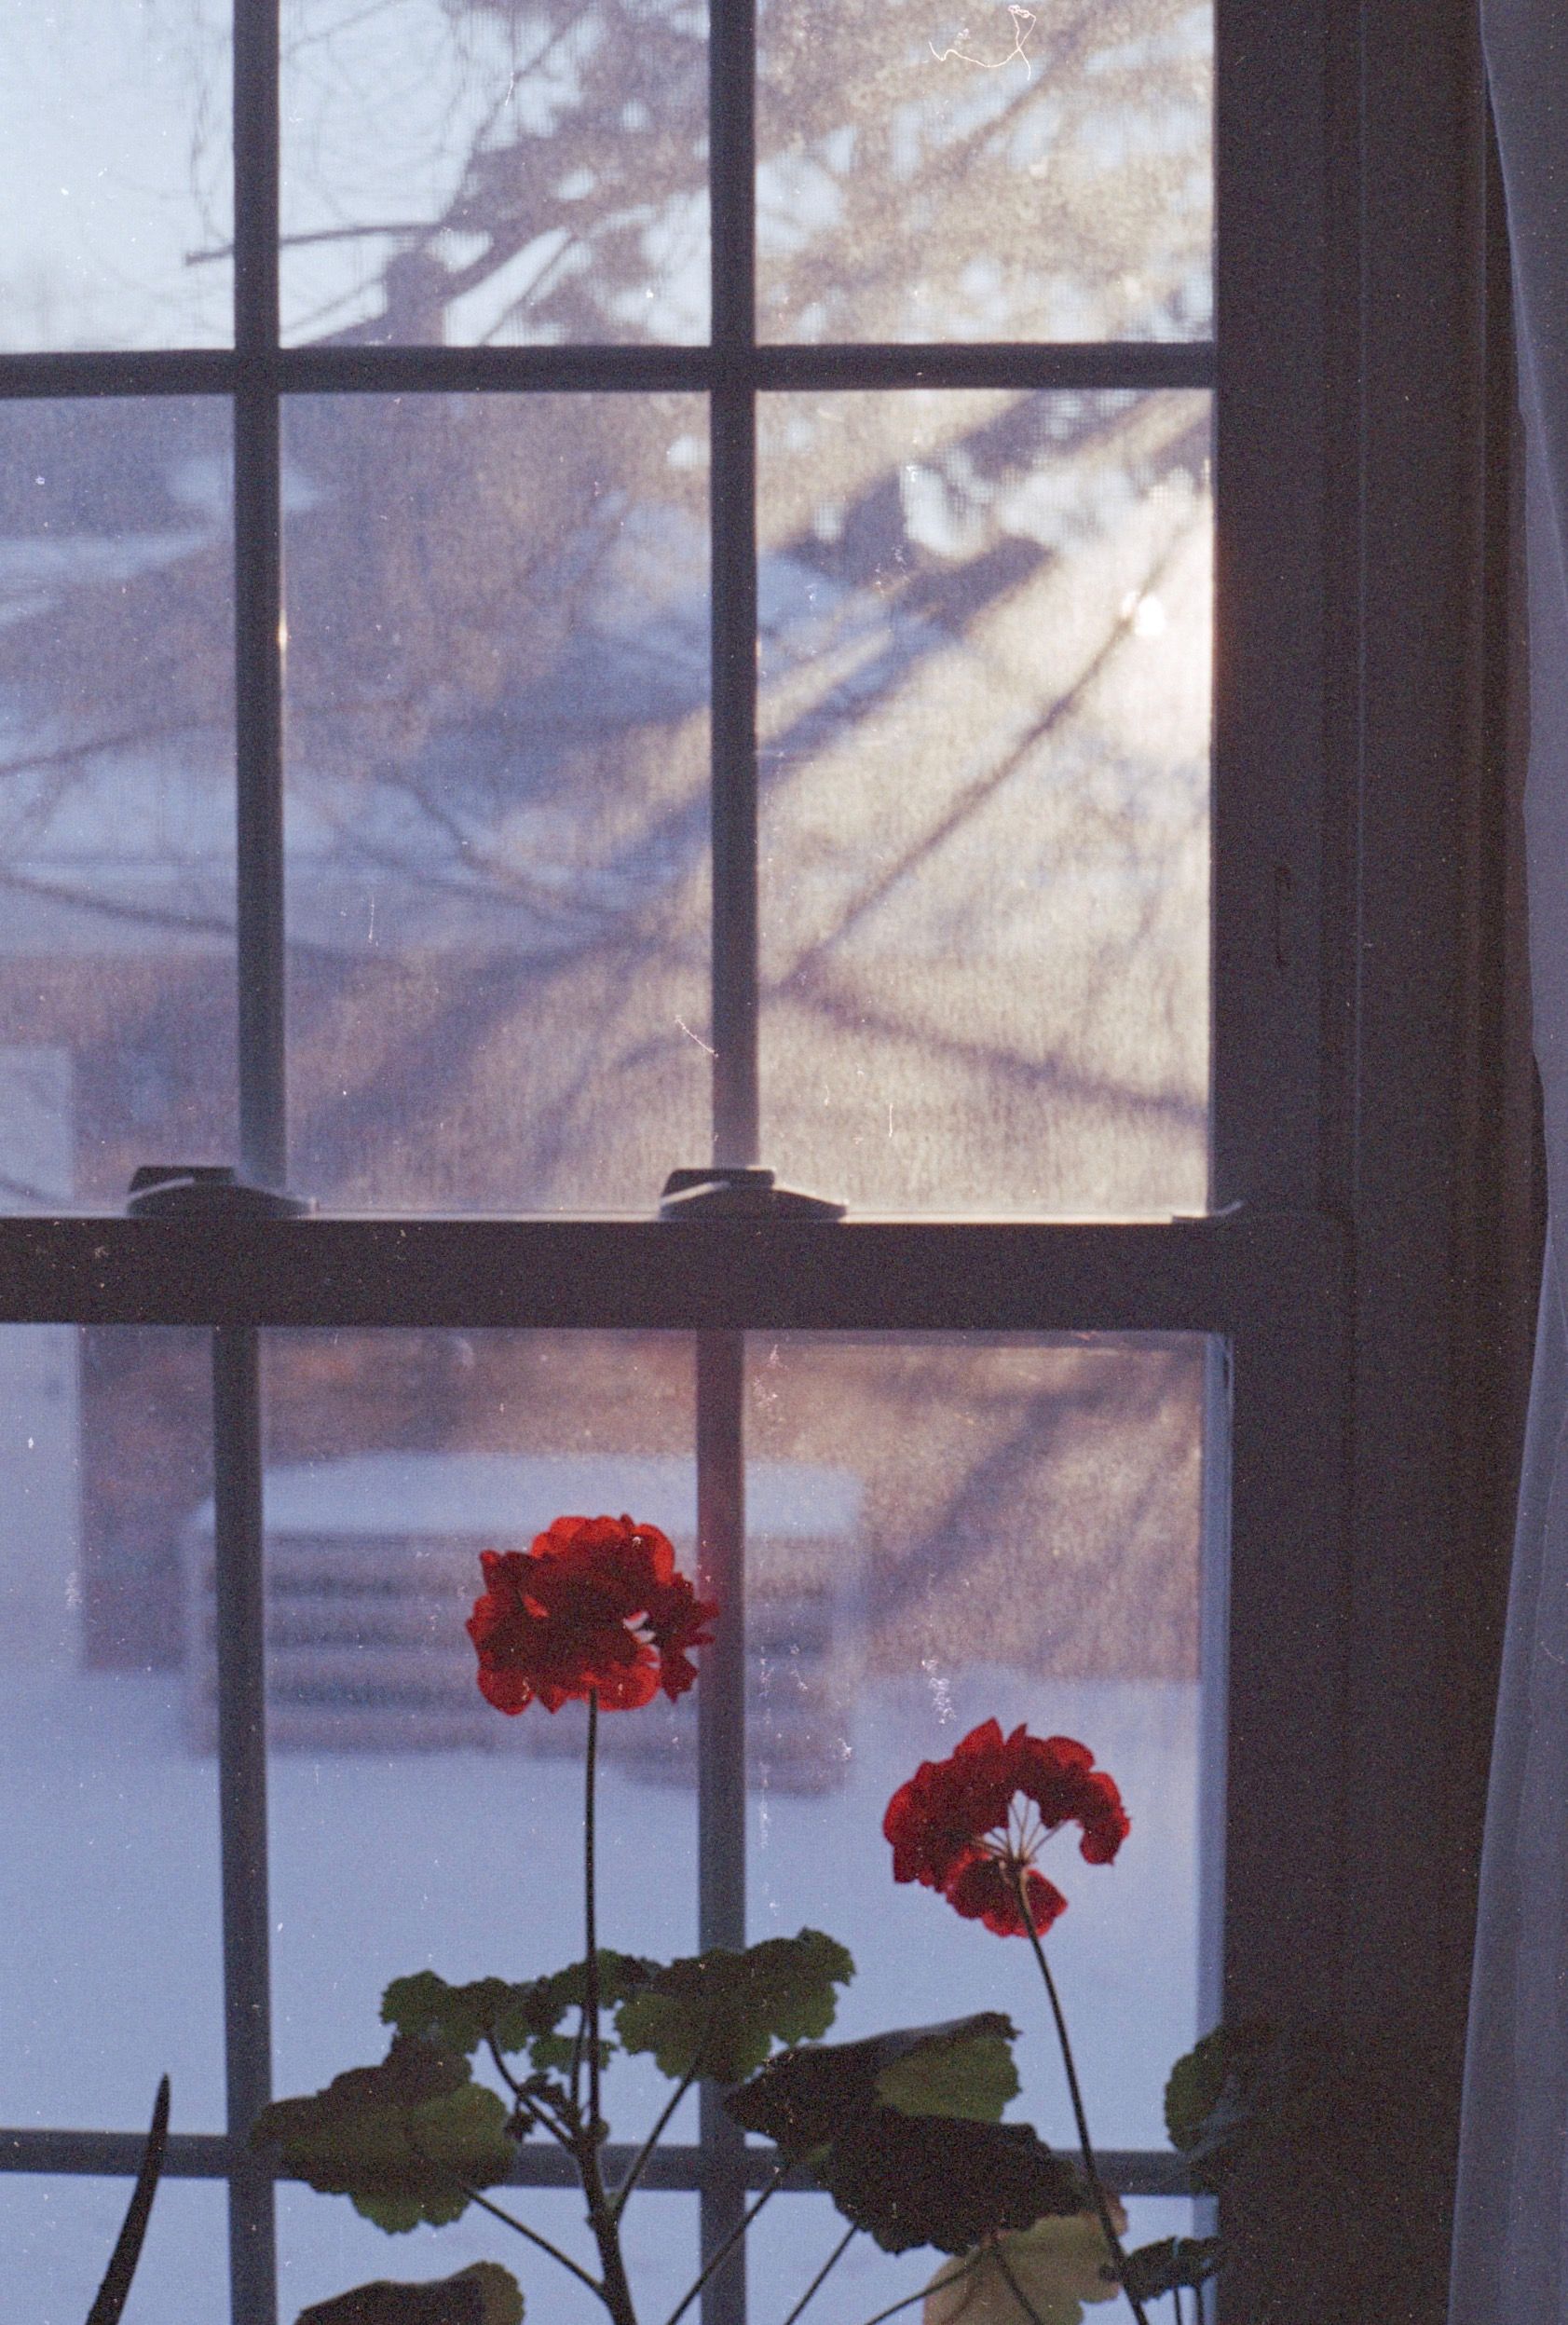 Two red geranium flowers pressed against white paned window. Snowy outside, dappled golden hour sun.